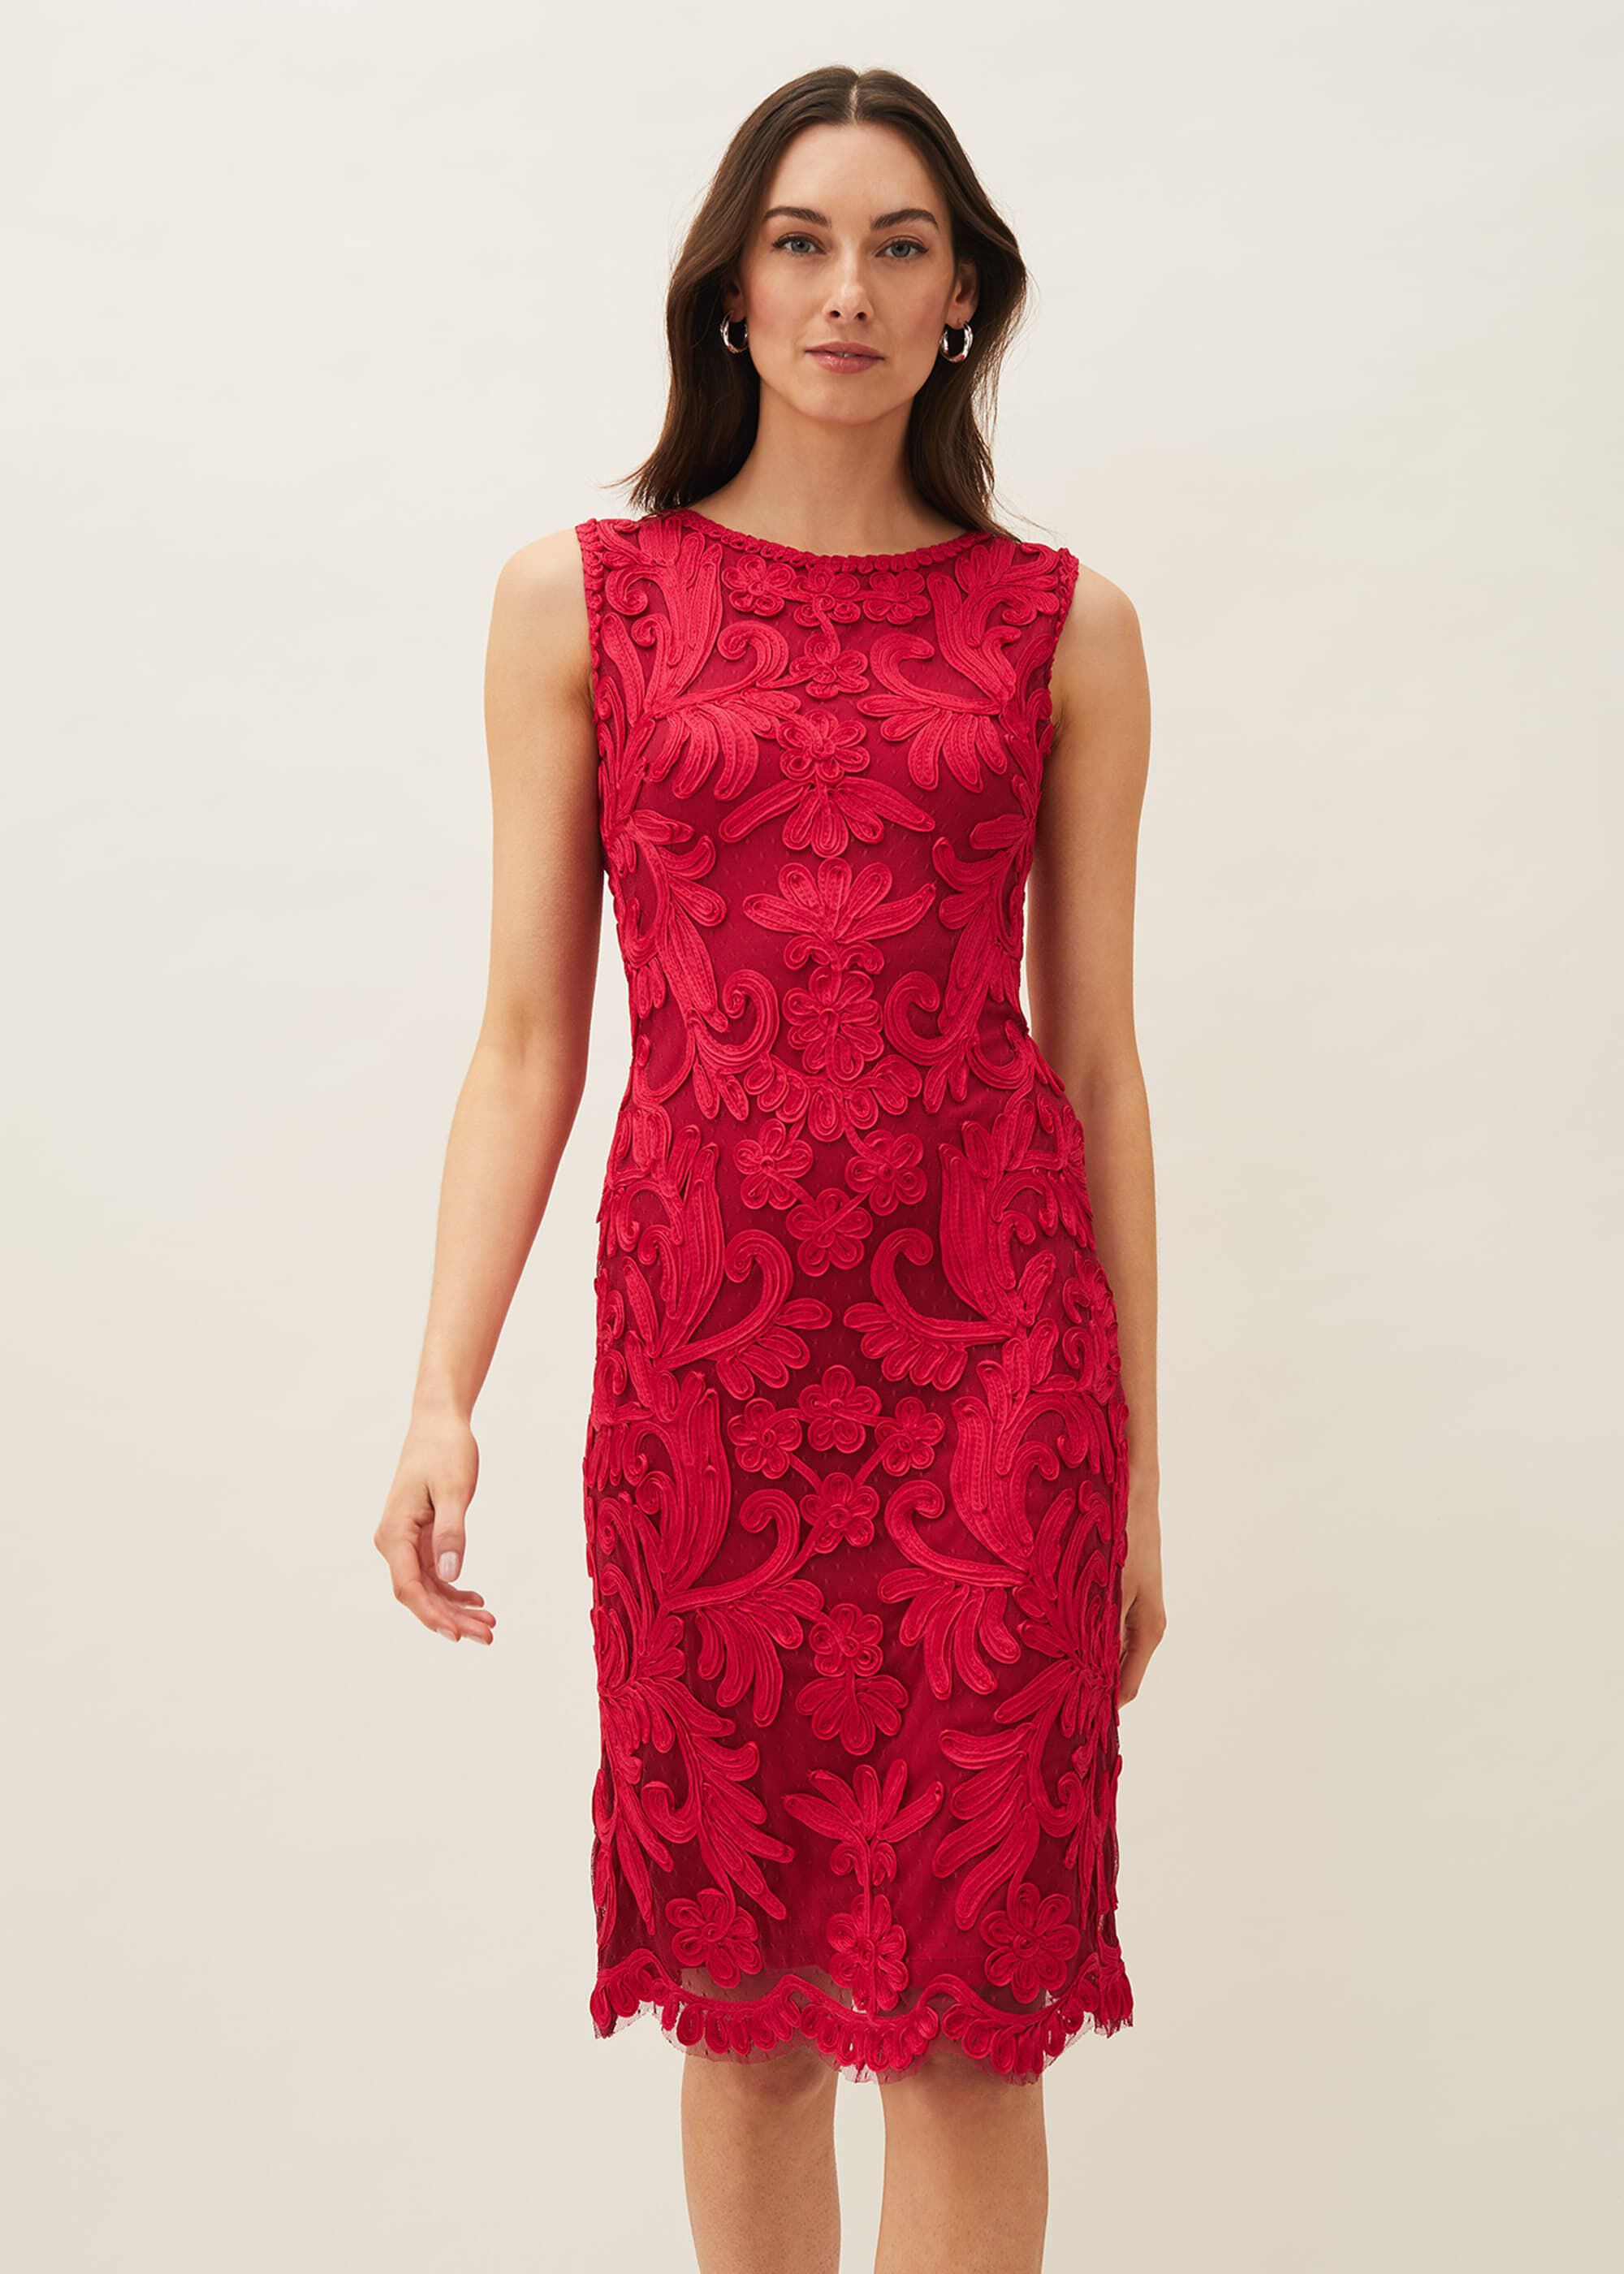 Phase Eight Cocktail Dresses Store, SAVE 31% - horiconphoenix.com